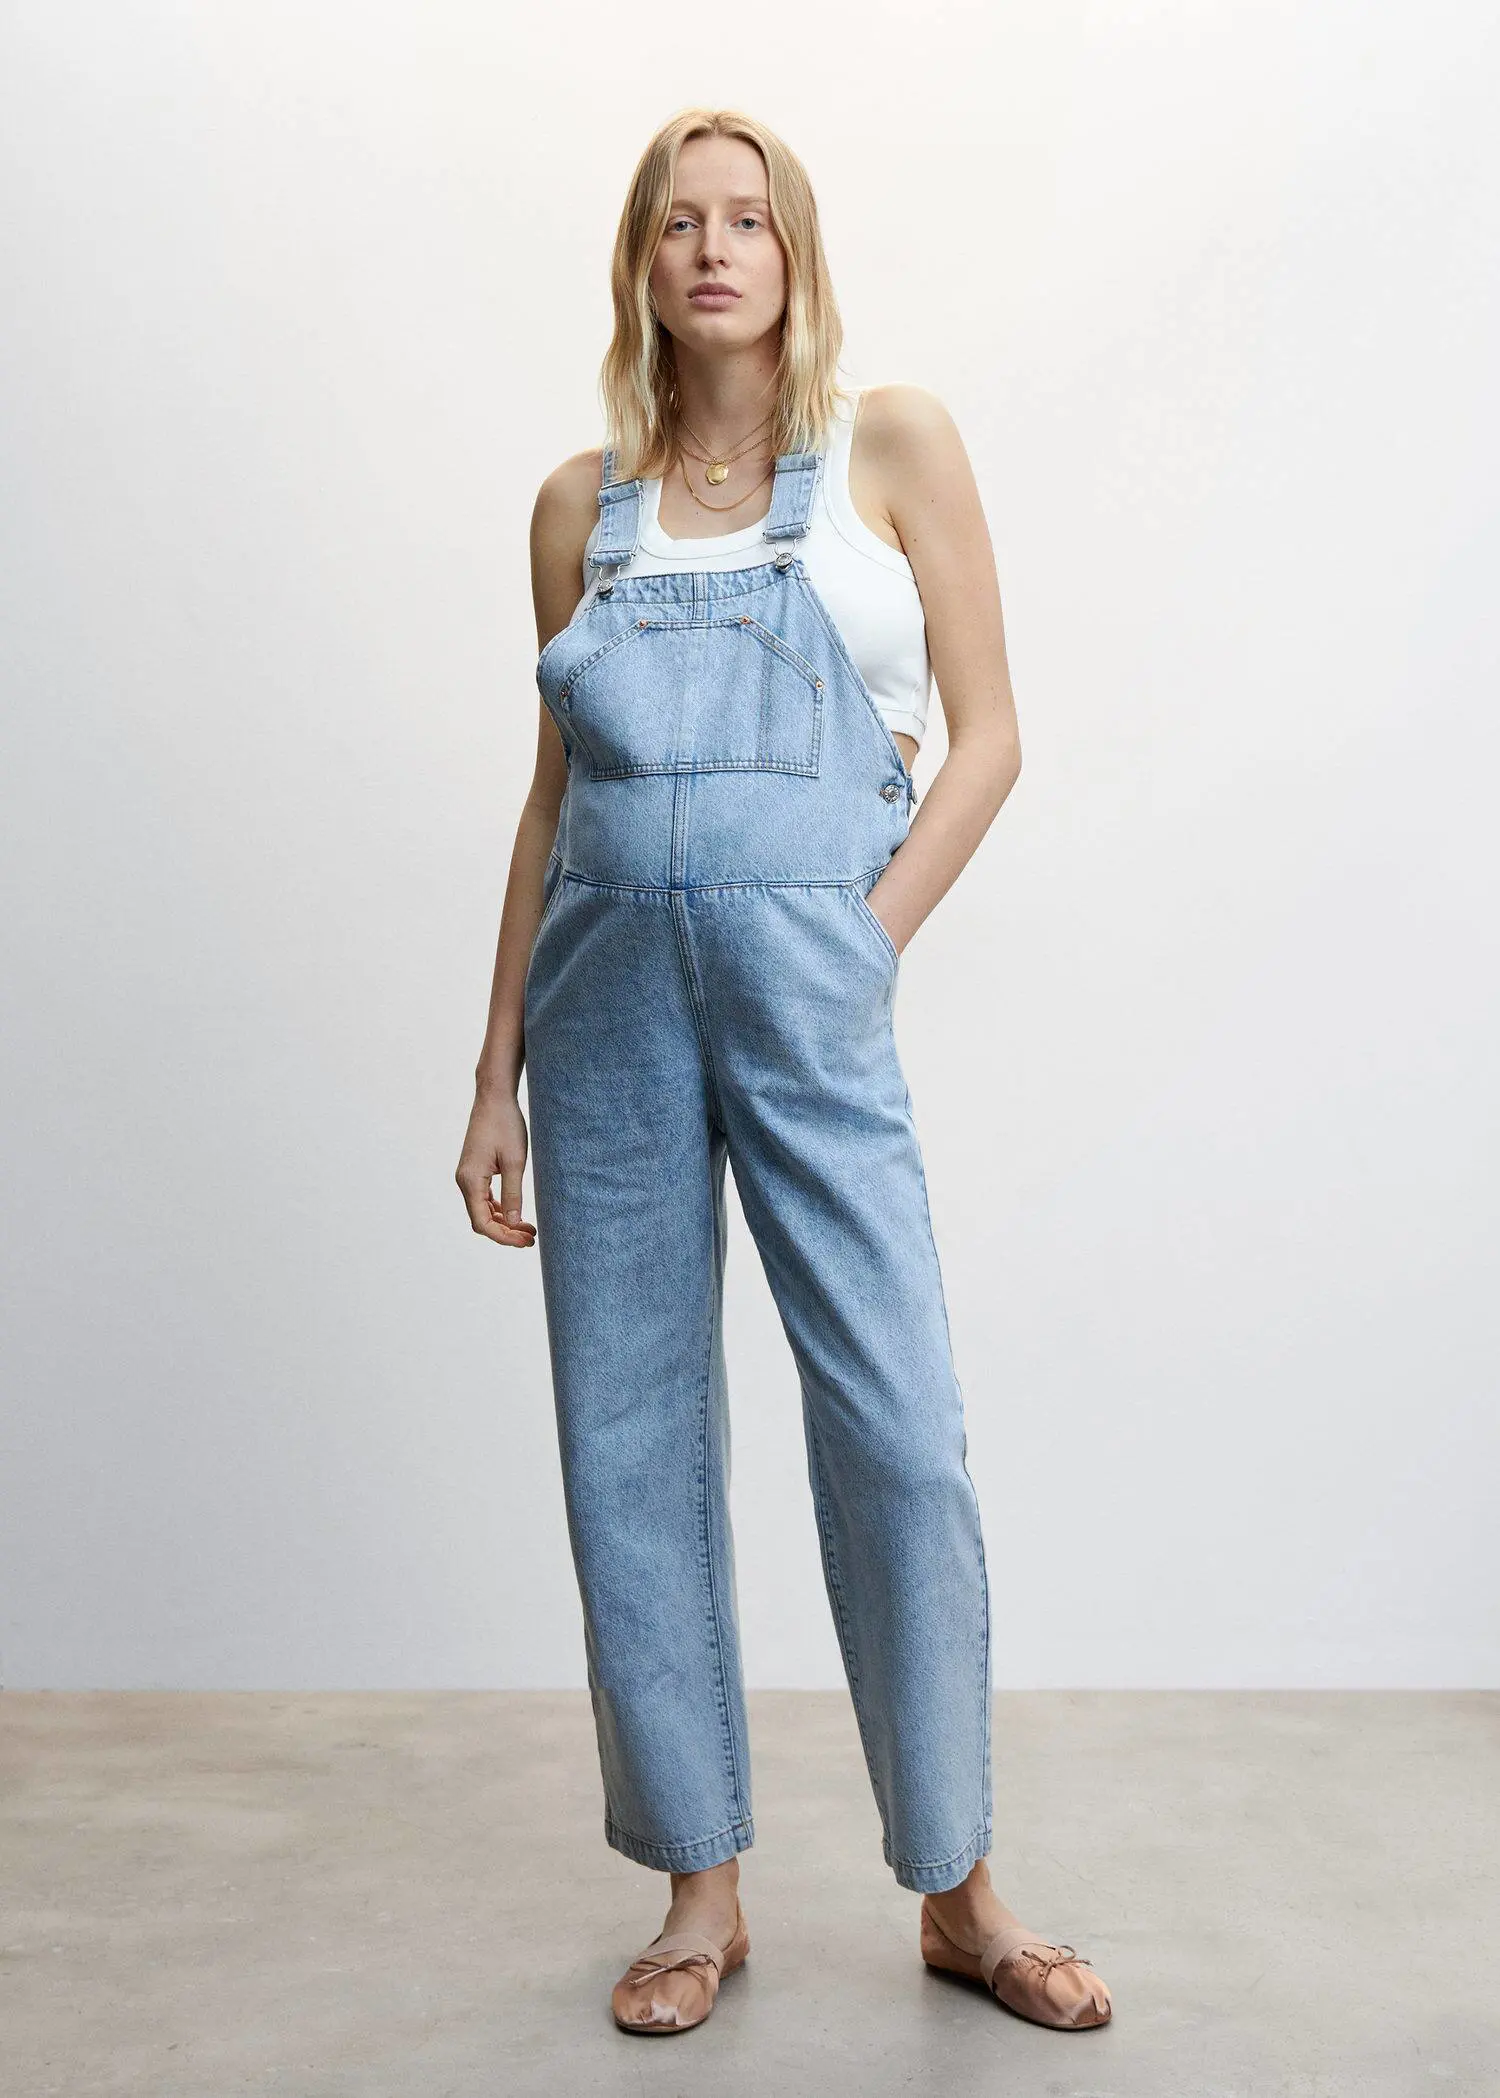 Mango Maternity denim dungarees. a woman wearing a pair of blue overalls. 